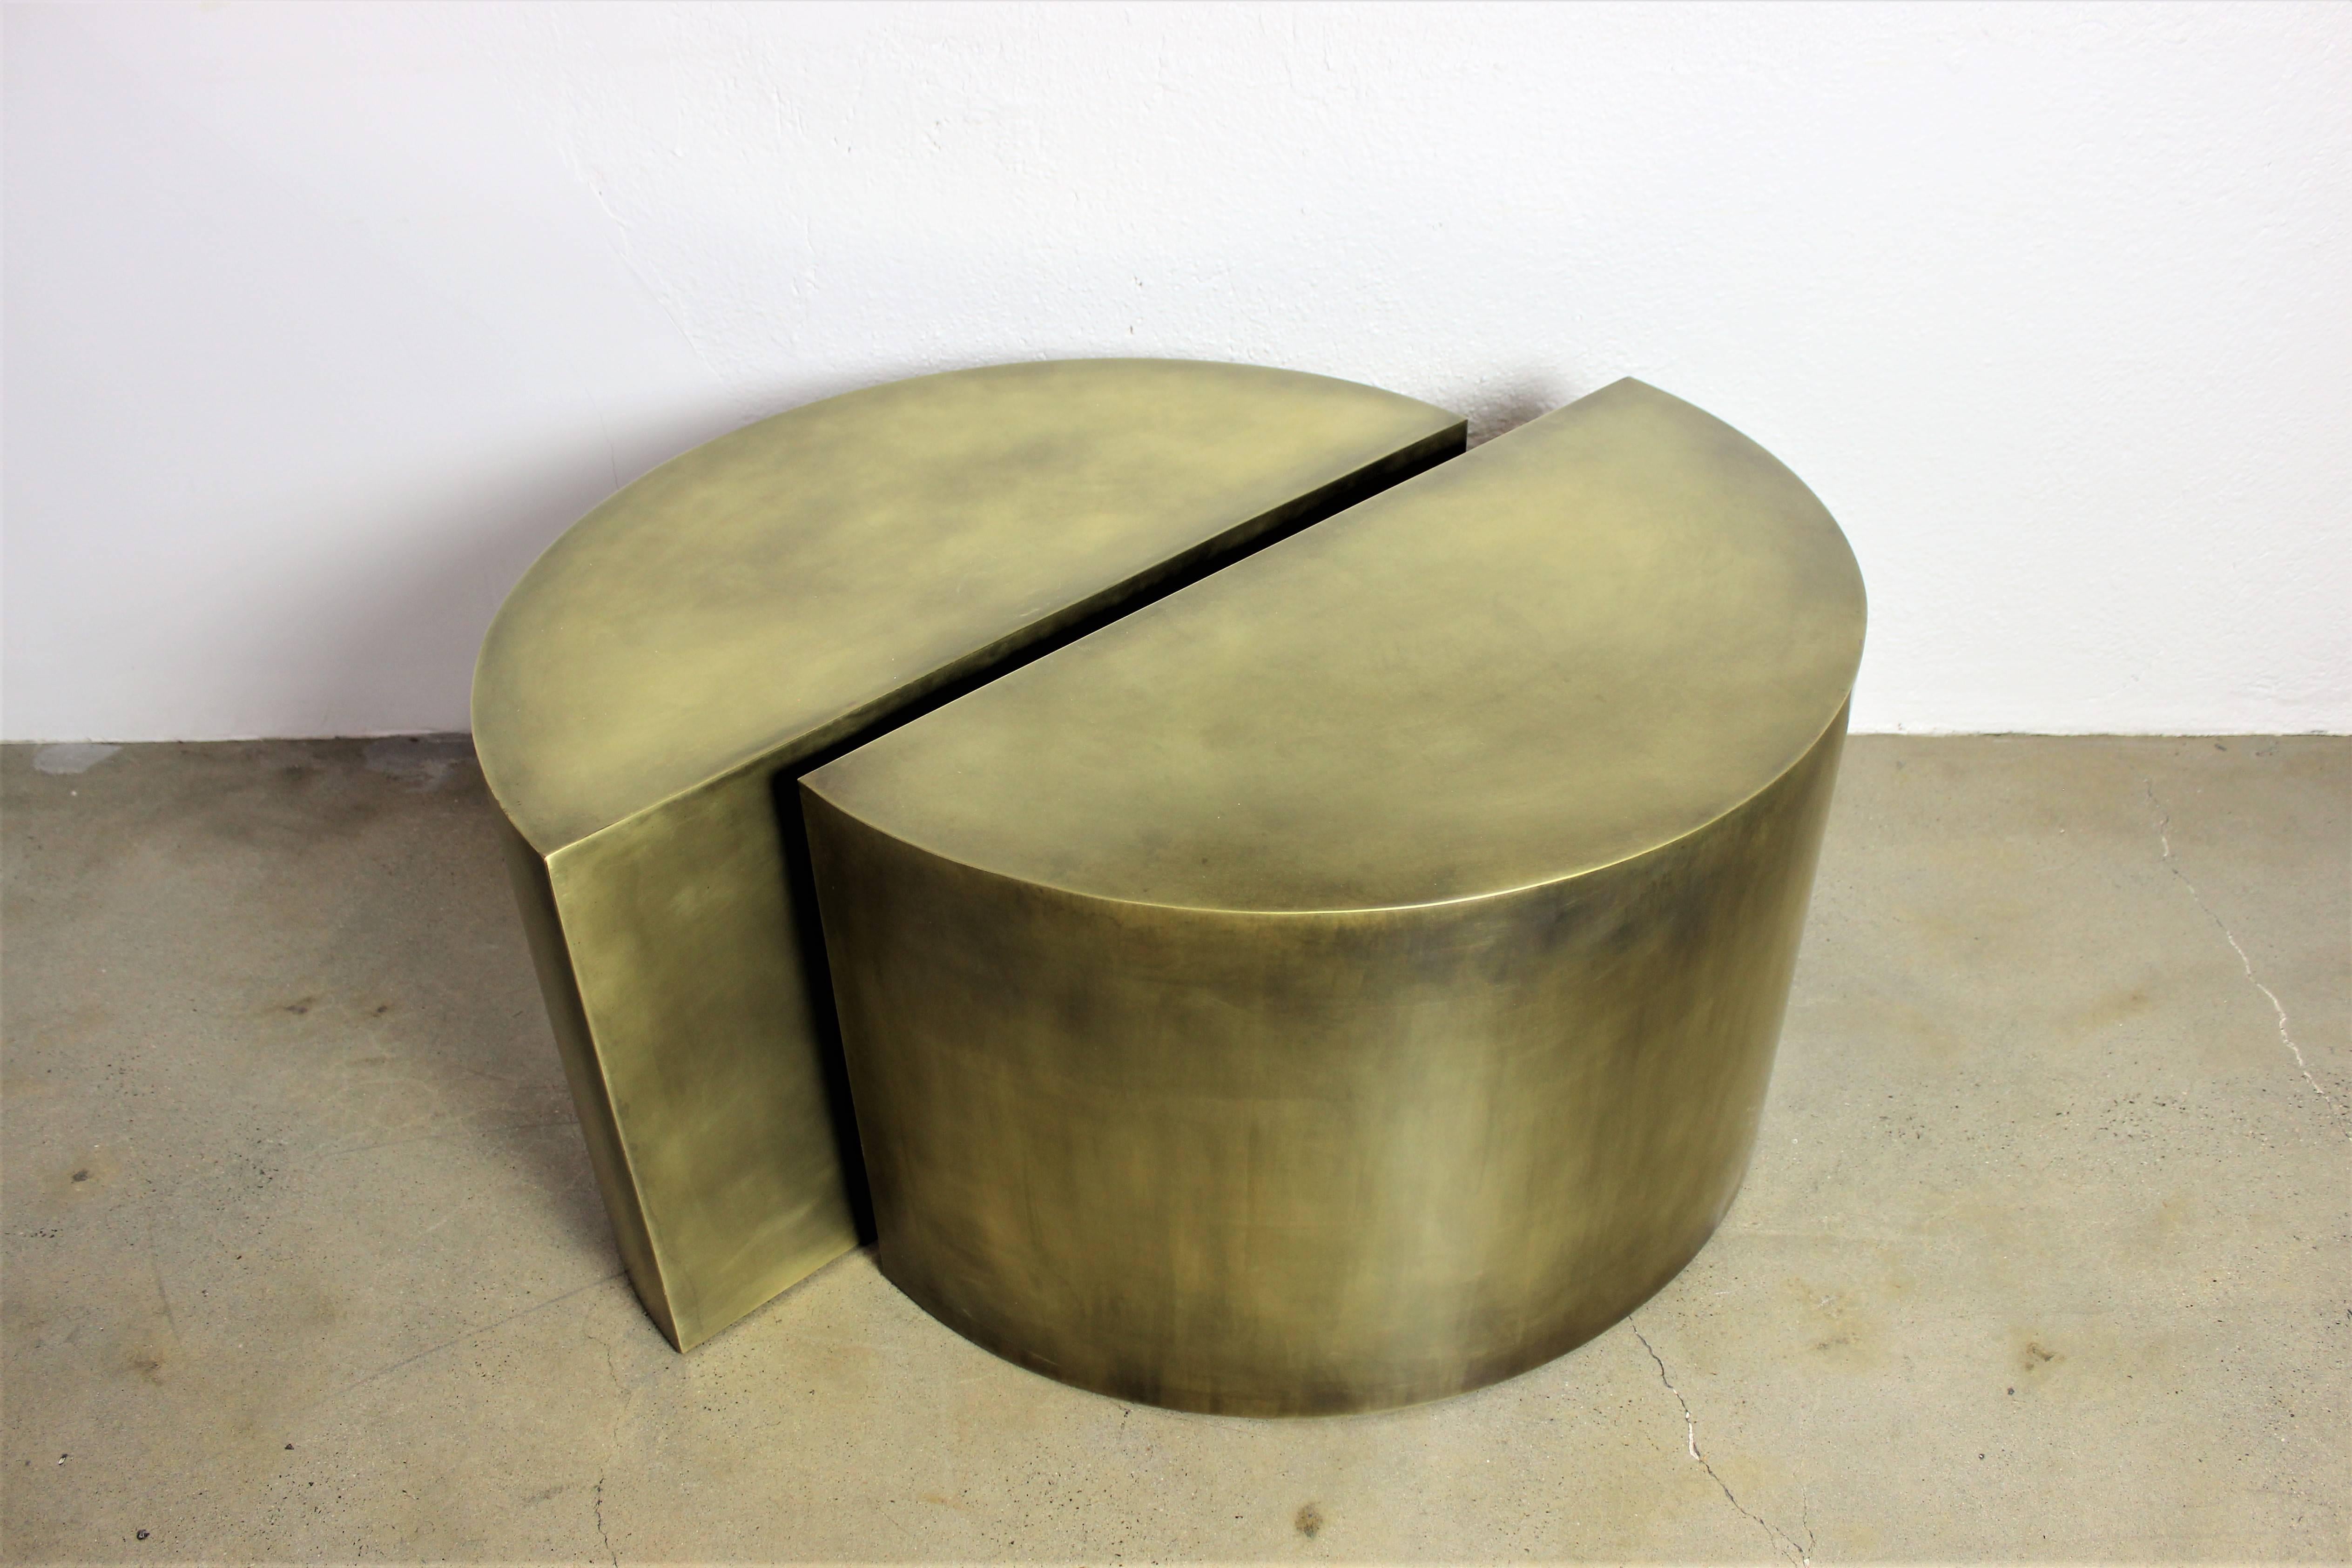 Solid brass geometric demilune side tables with heavy patina. Architectural, minimalist design made from the highest quality materials. These tables are contemporary artist-made pieces and were meticulously handcrafted in New England. The antique